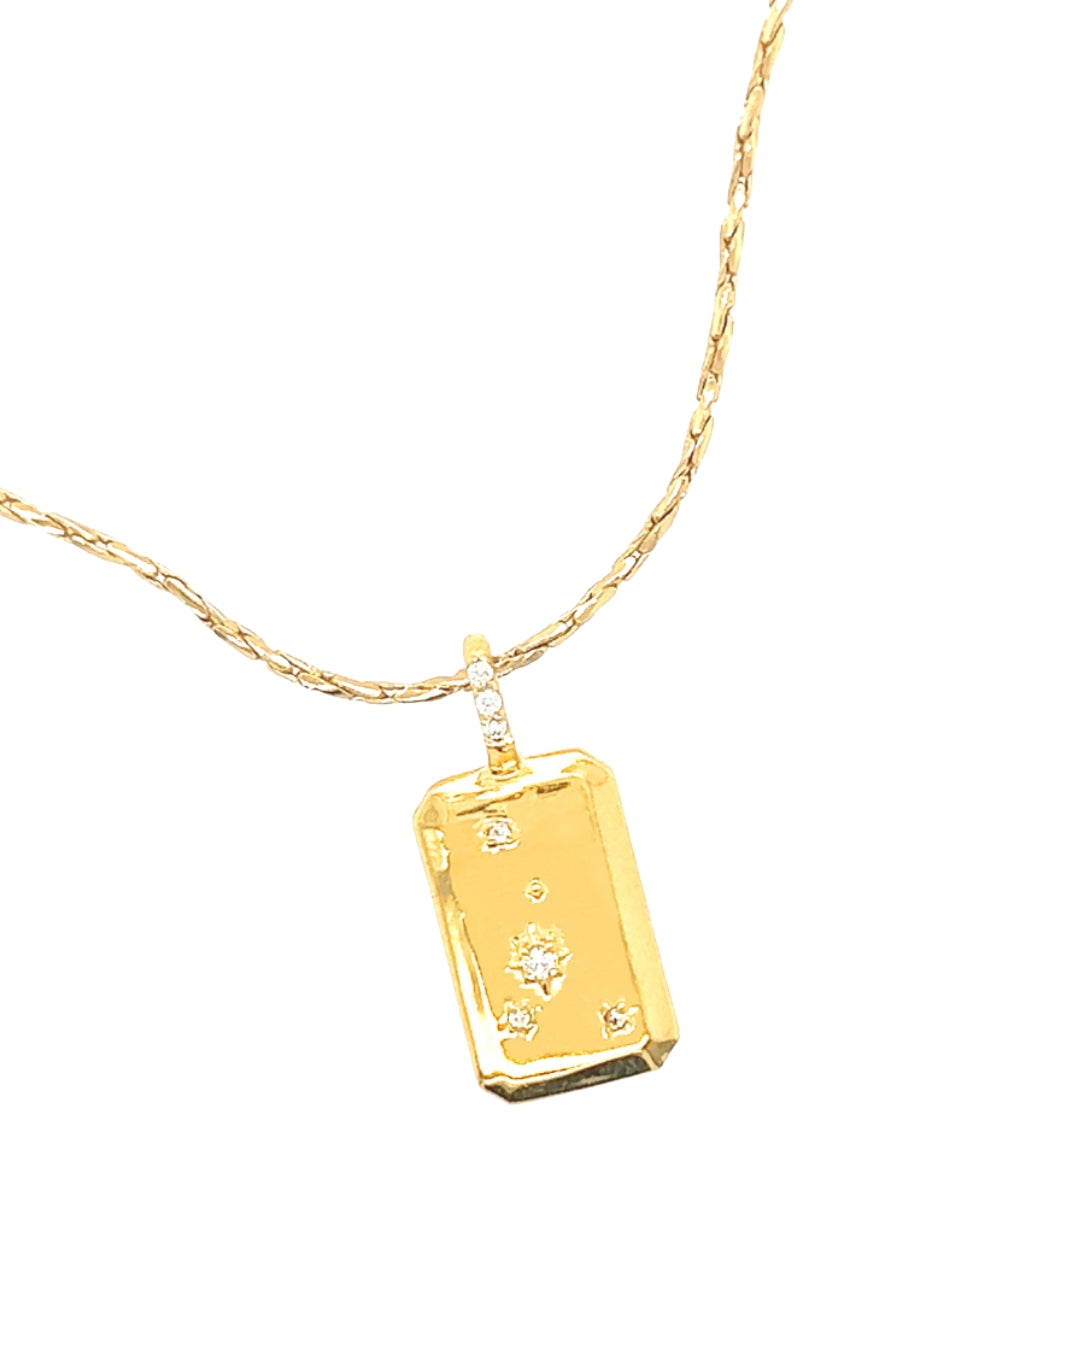 Gold Cancer Constellation Zodiac Pendant on a Gold Necklace Chain